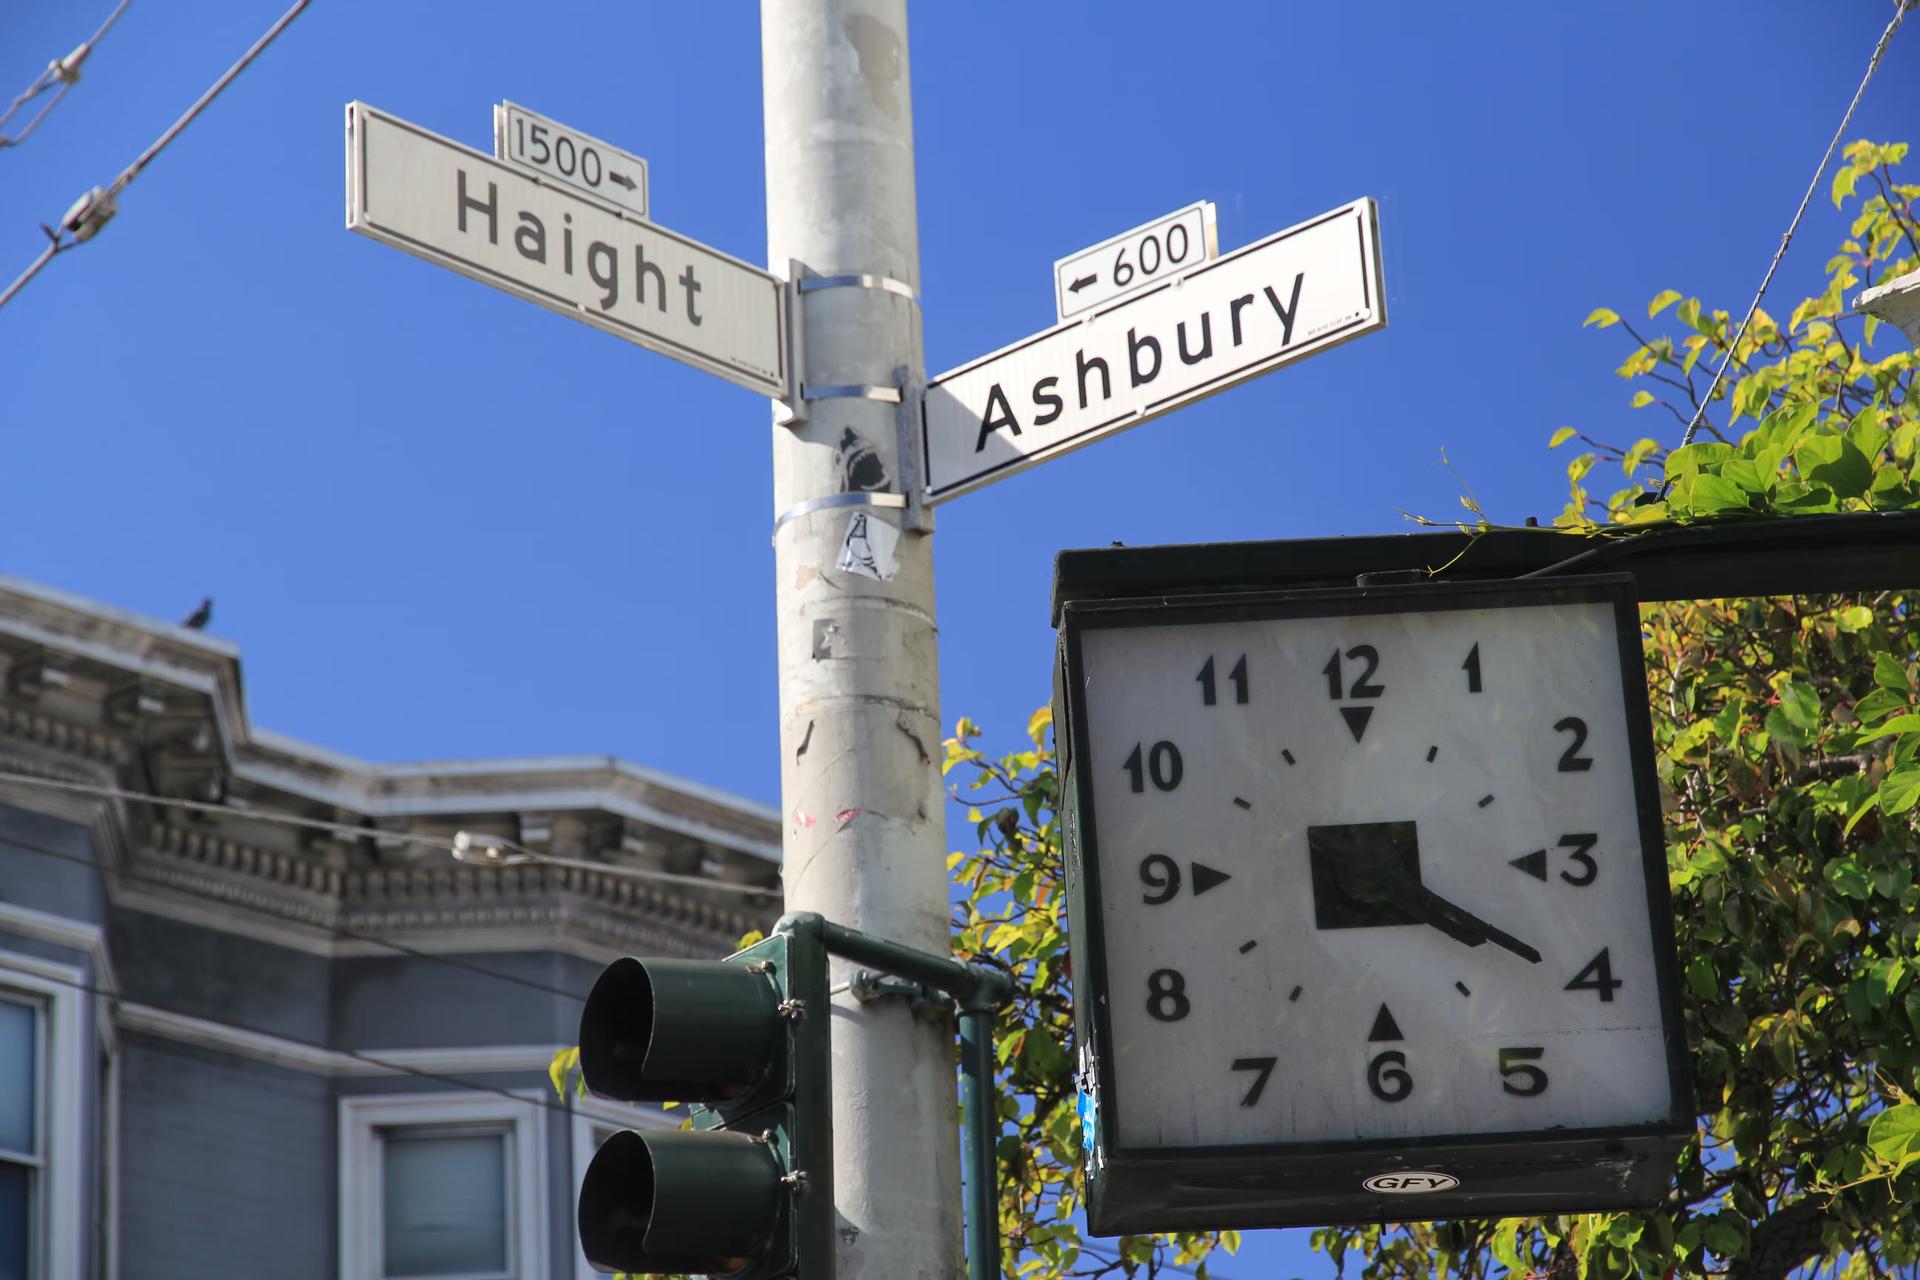 Haight Ashbury intersection sign with 4:20 clock